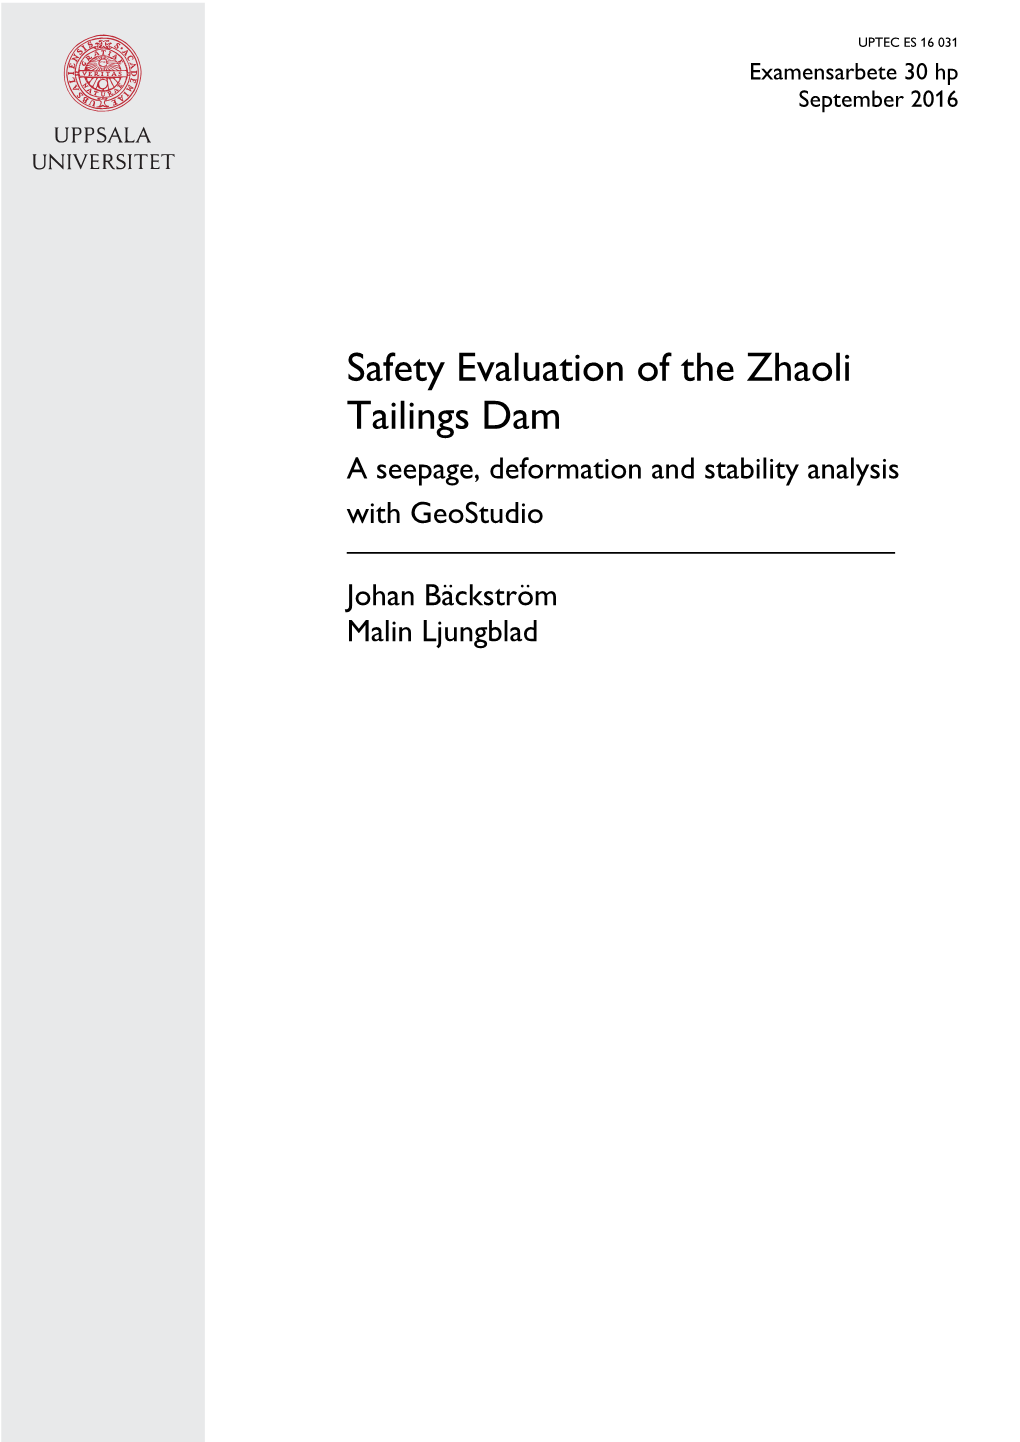 Safety Evaluation of the Zhaoli Tailings Dam a Seepage, Deformation and Stability Analysis with Geostudio